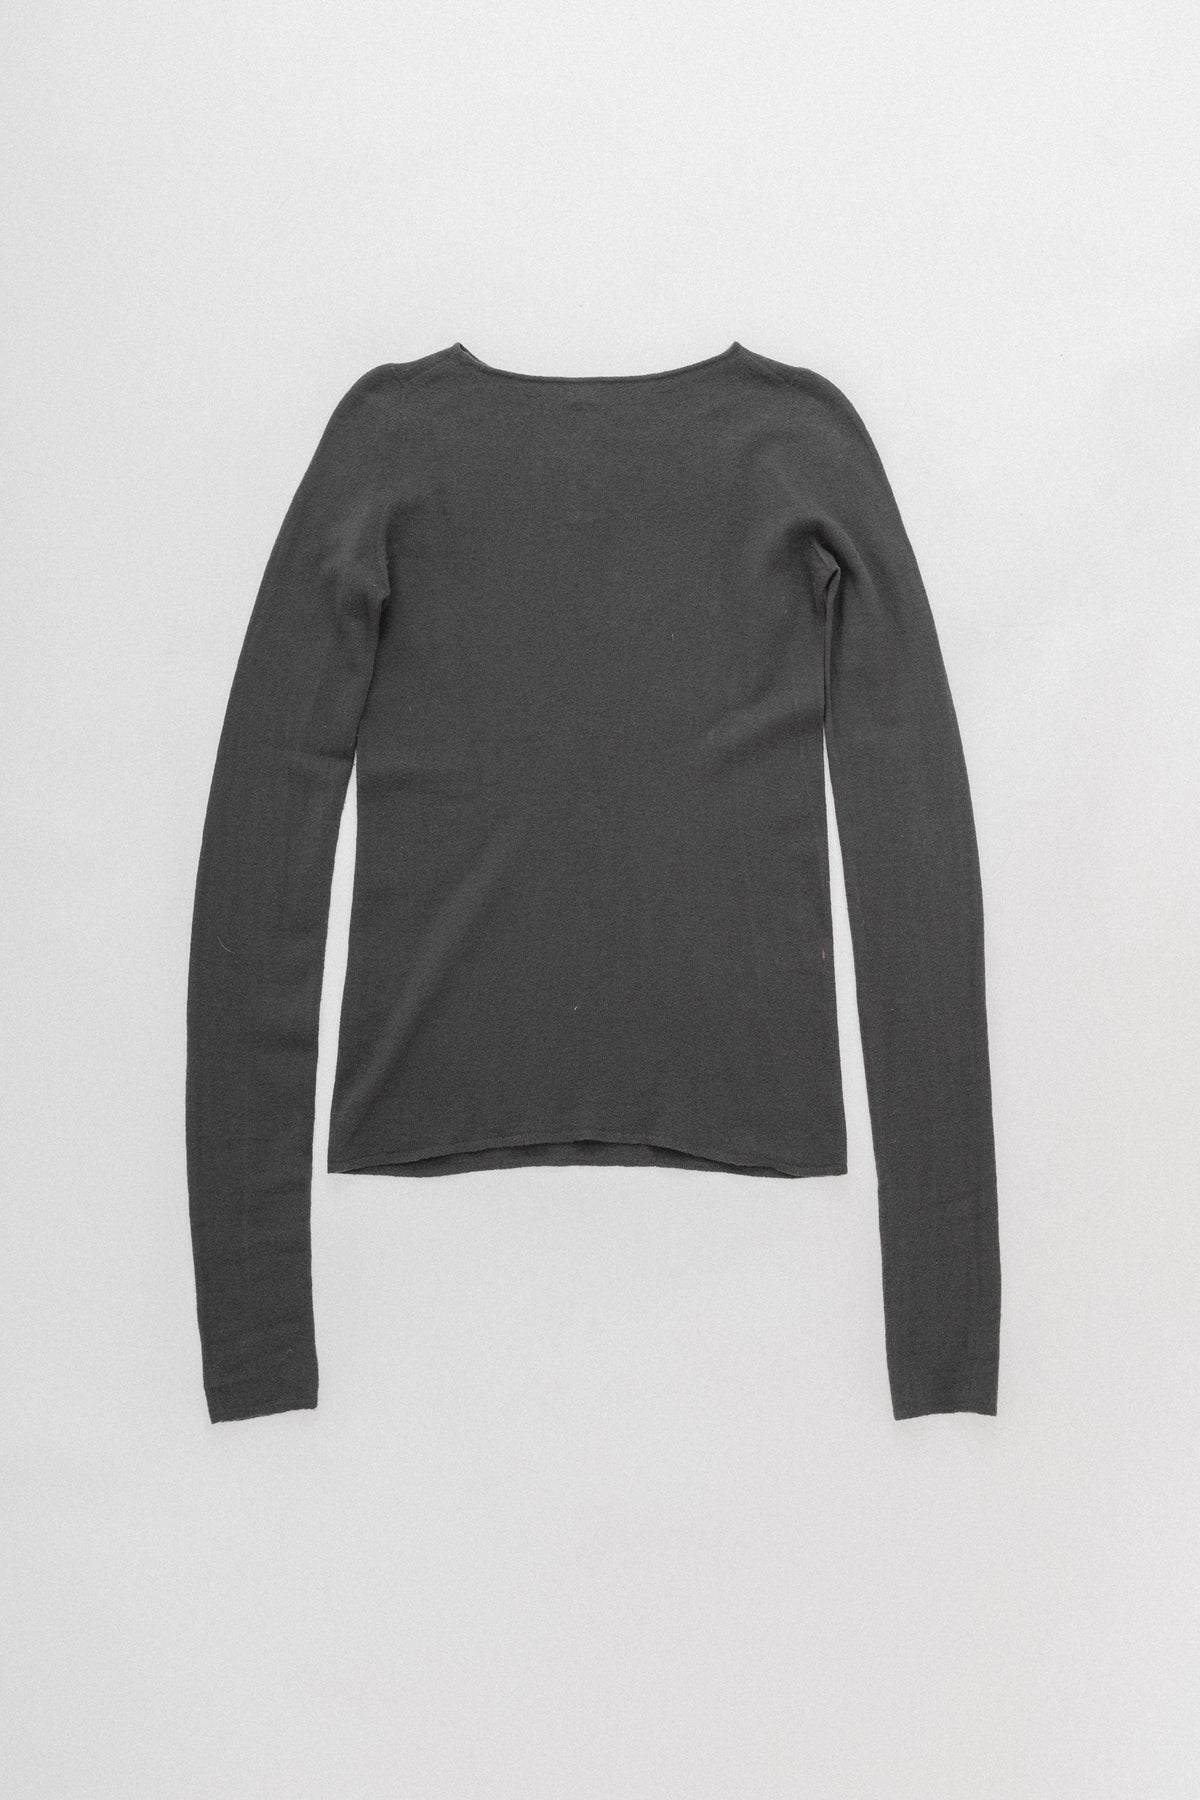 RICK OWENS - FW06 DUSTULATOR Wool knitted sweater – L'OBSCUR